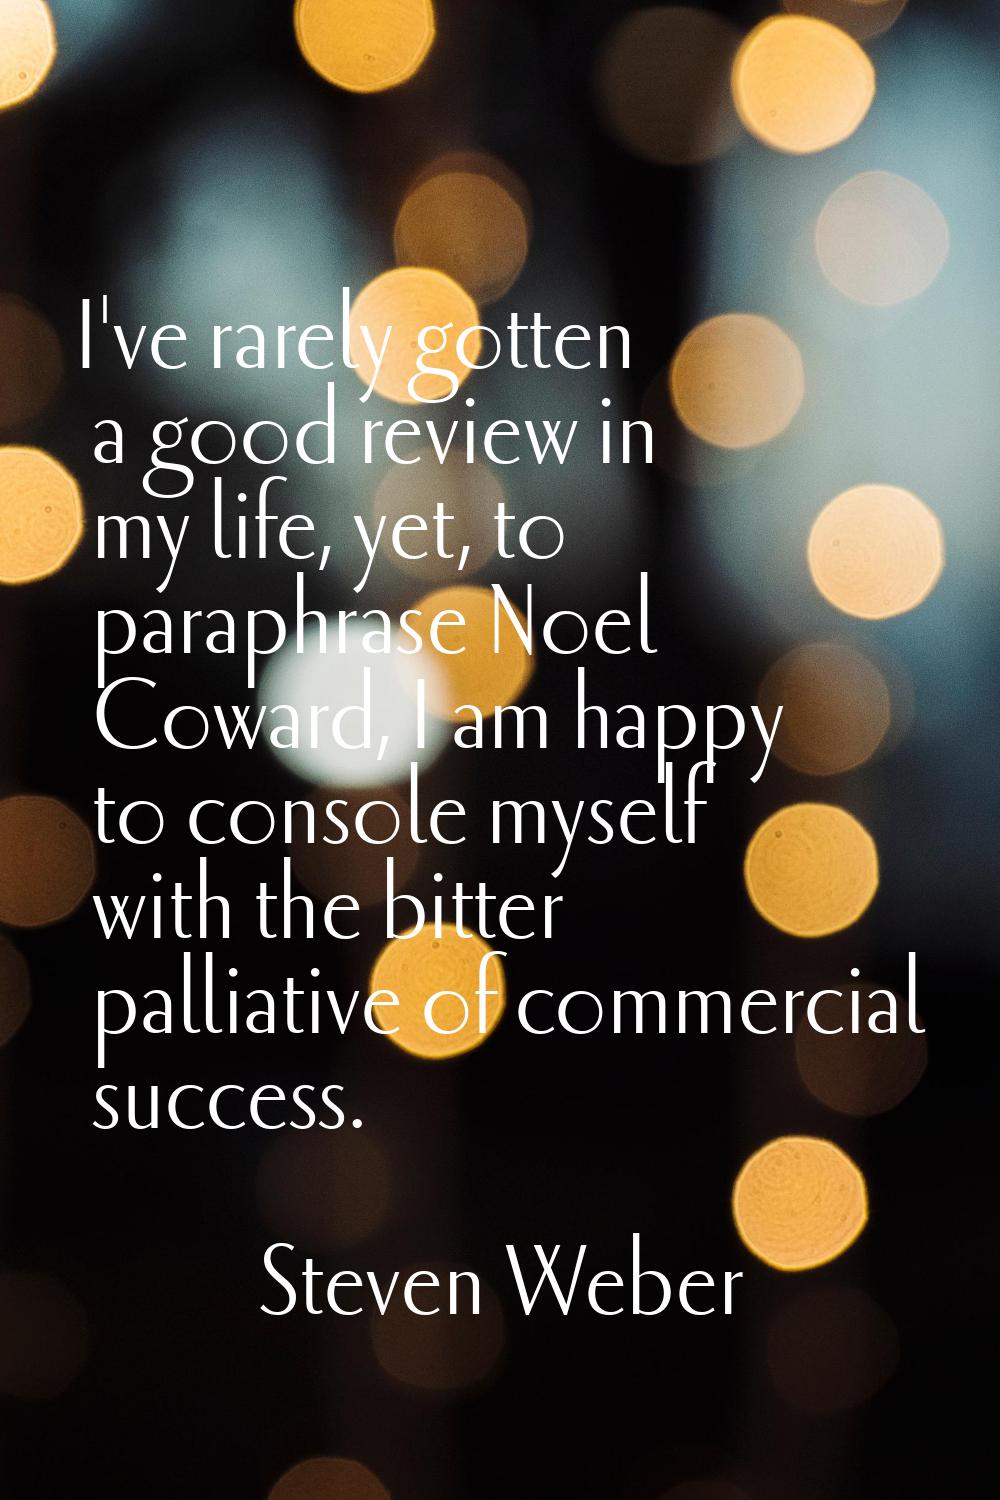 I've rarely gotten a good review in my life, yet, to paraphrase Noel Coward, I am happy to console 